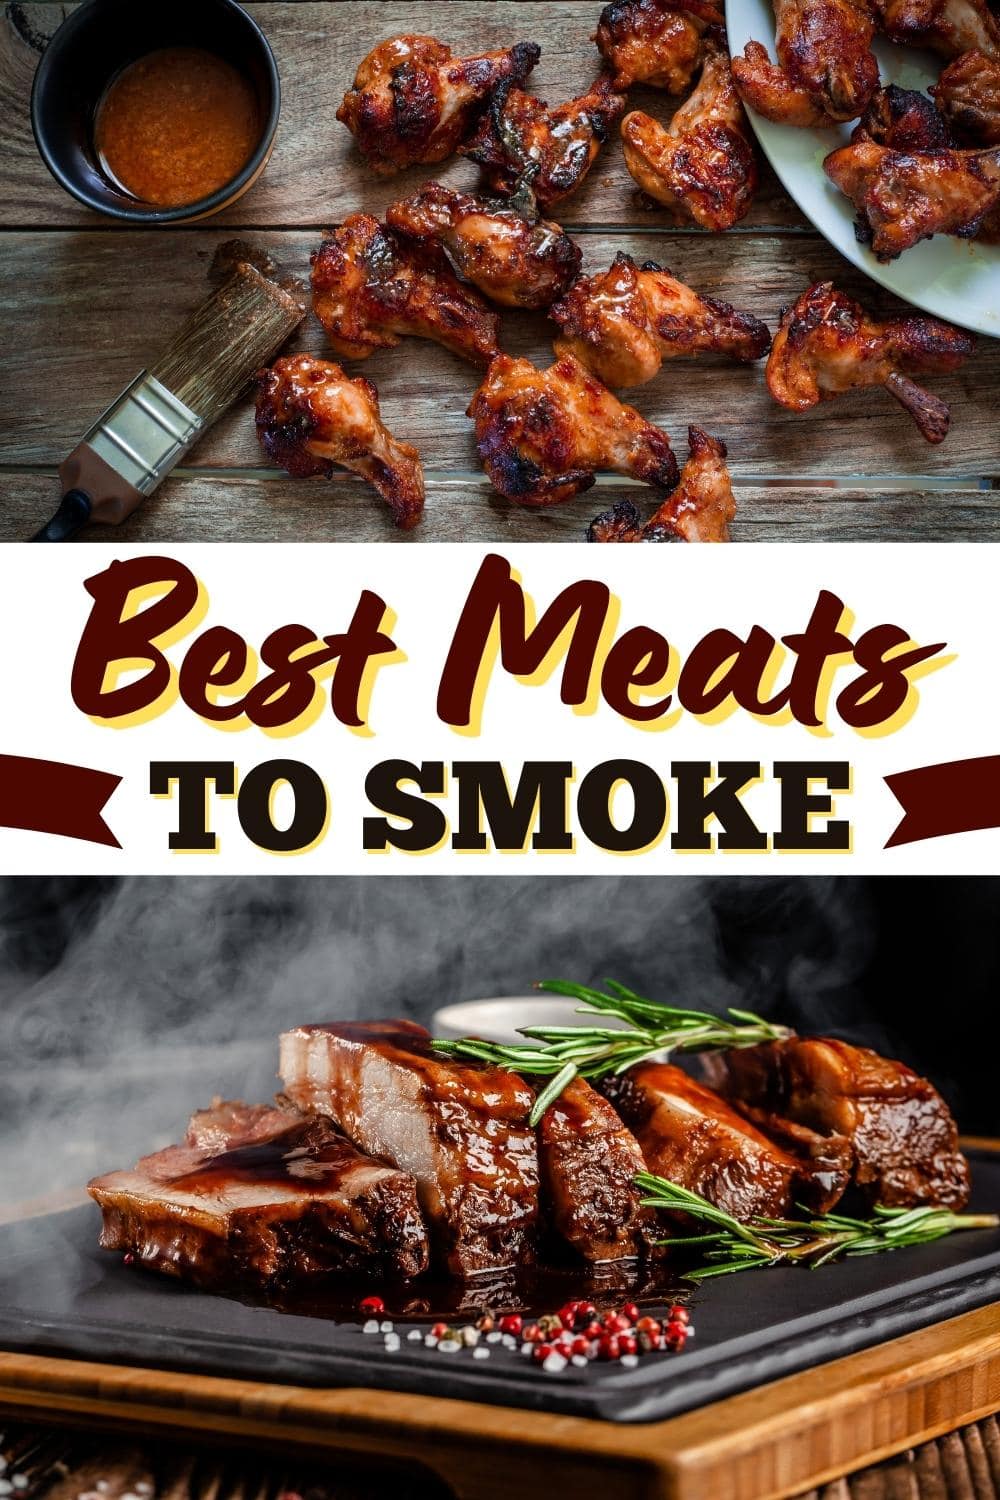 The Best Meats to Smoke at Home